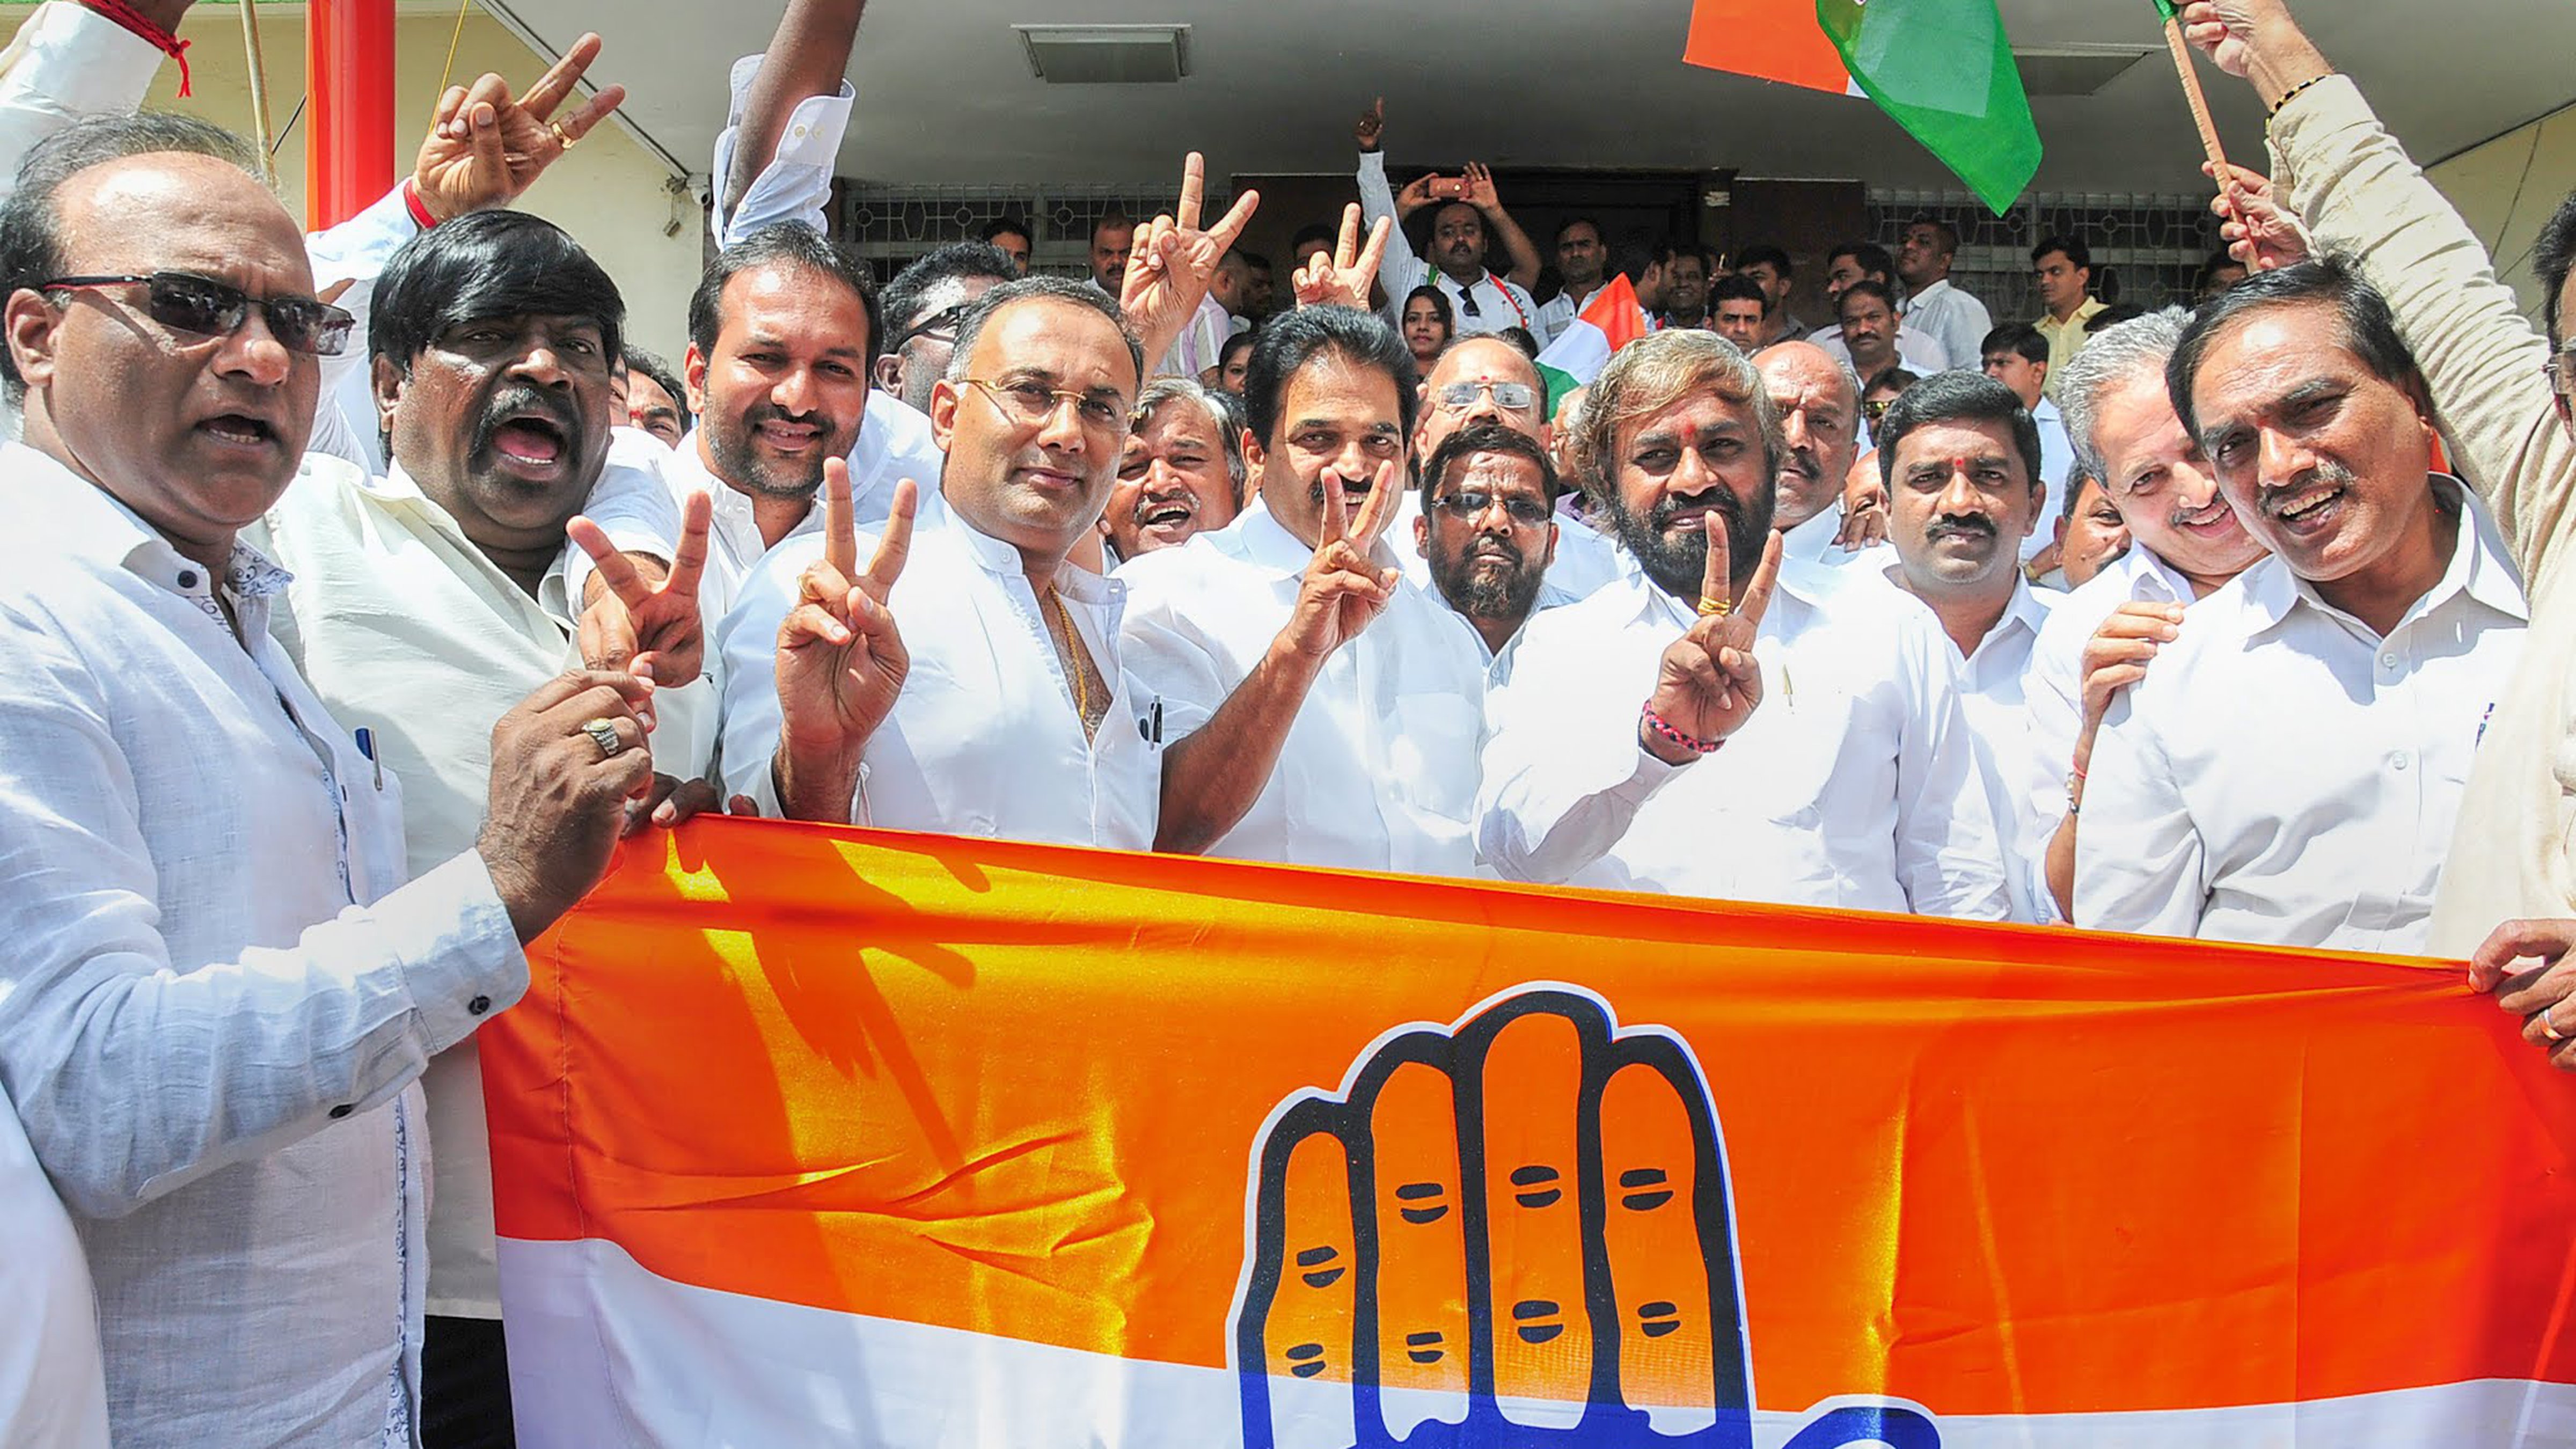 Bellary defeat reminds BJP of alliance menace